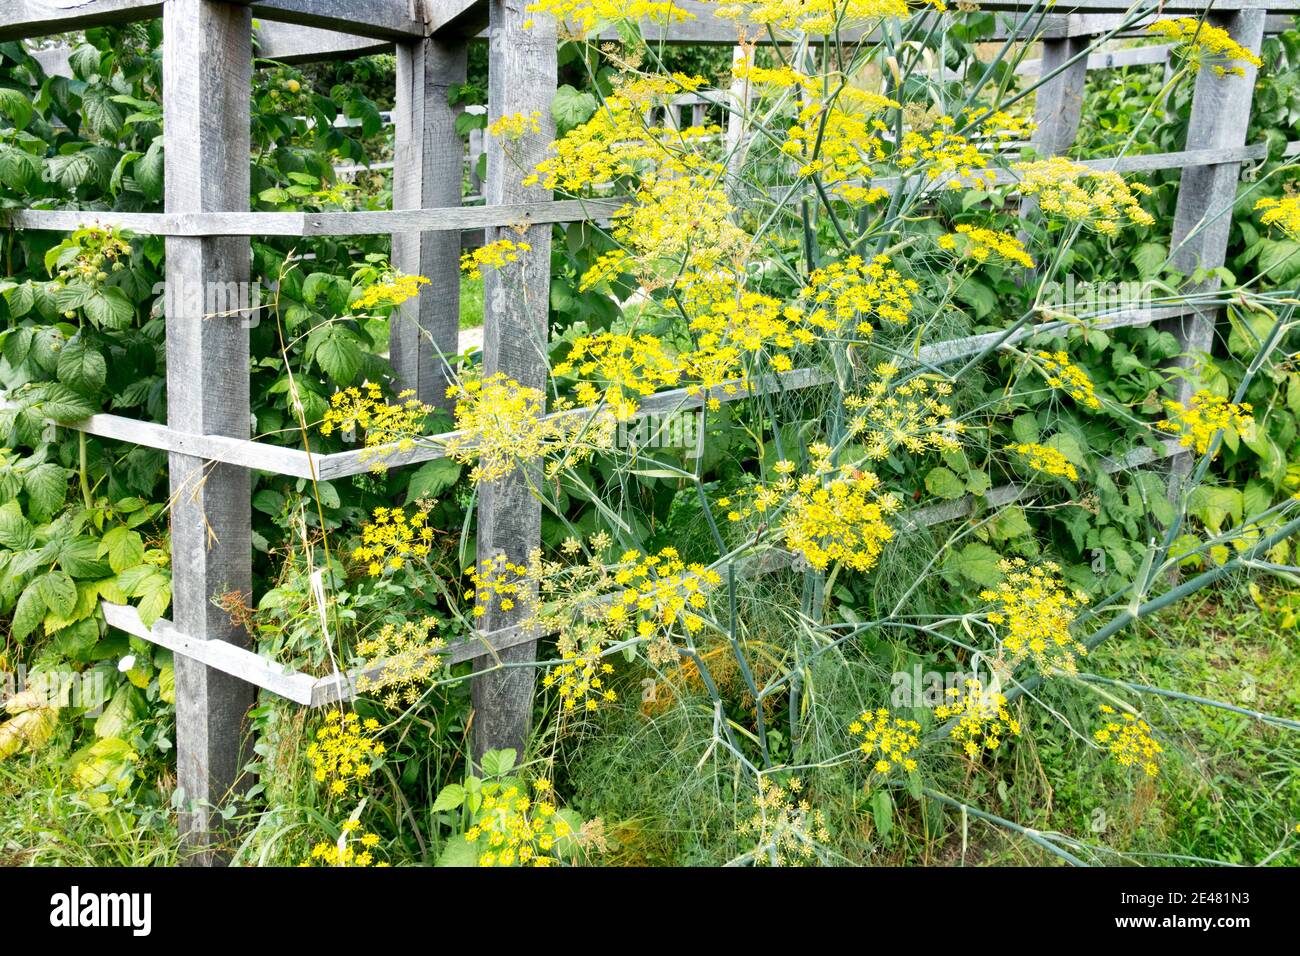 Fennel flower heads in the garden growing at a wooden support, Culinary herbs Stock Photo